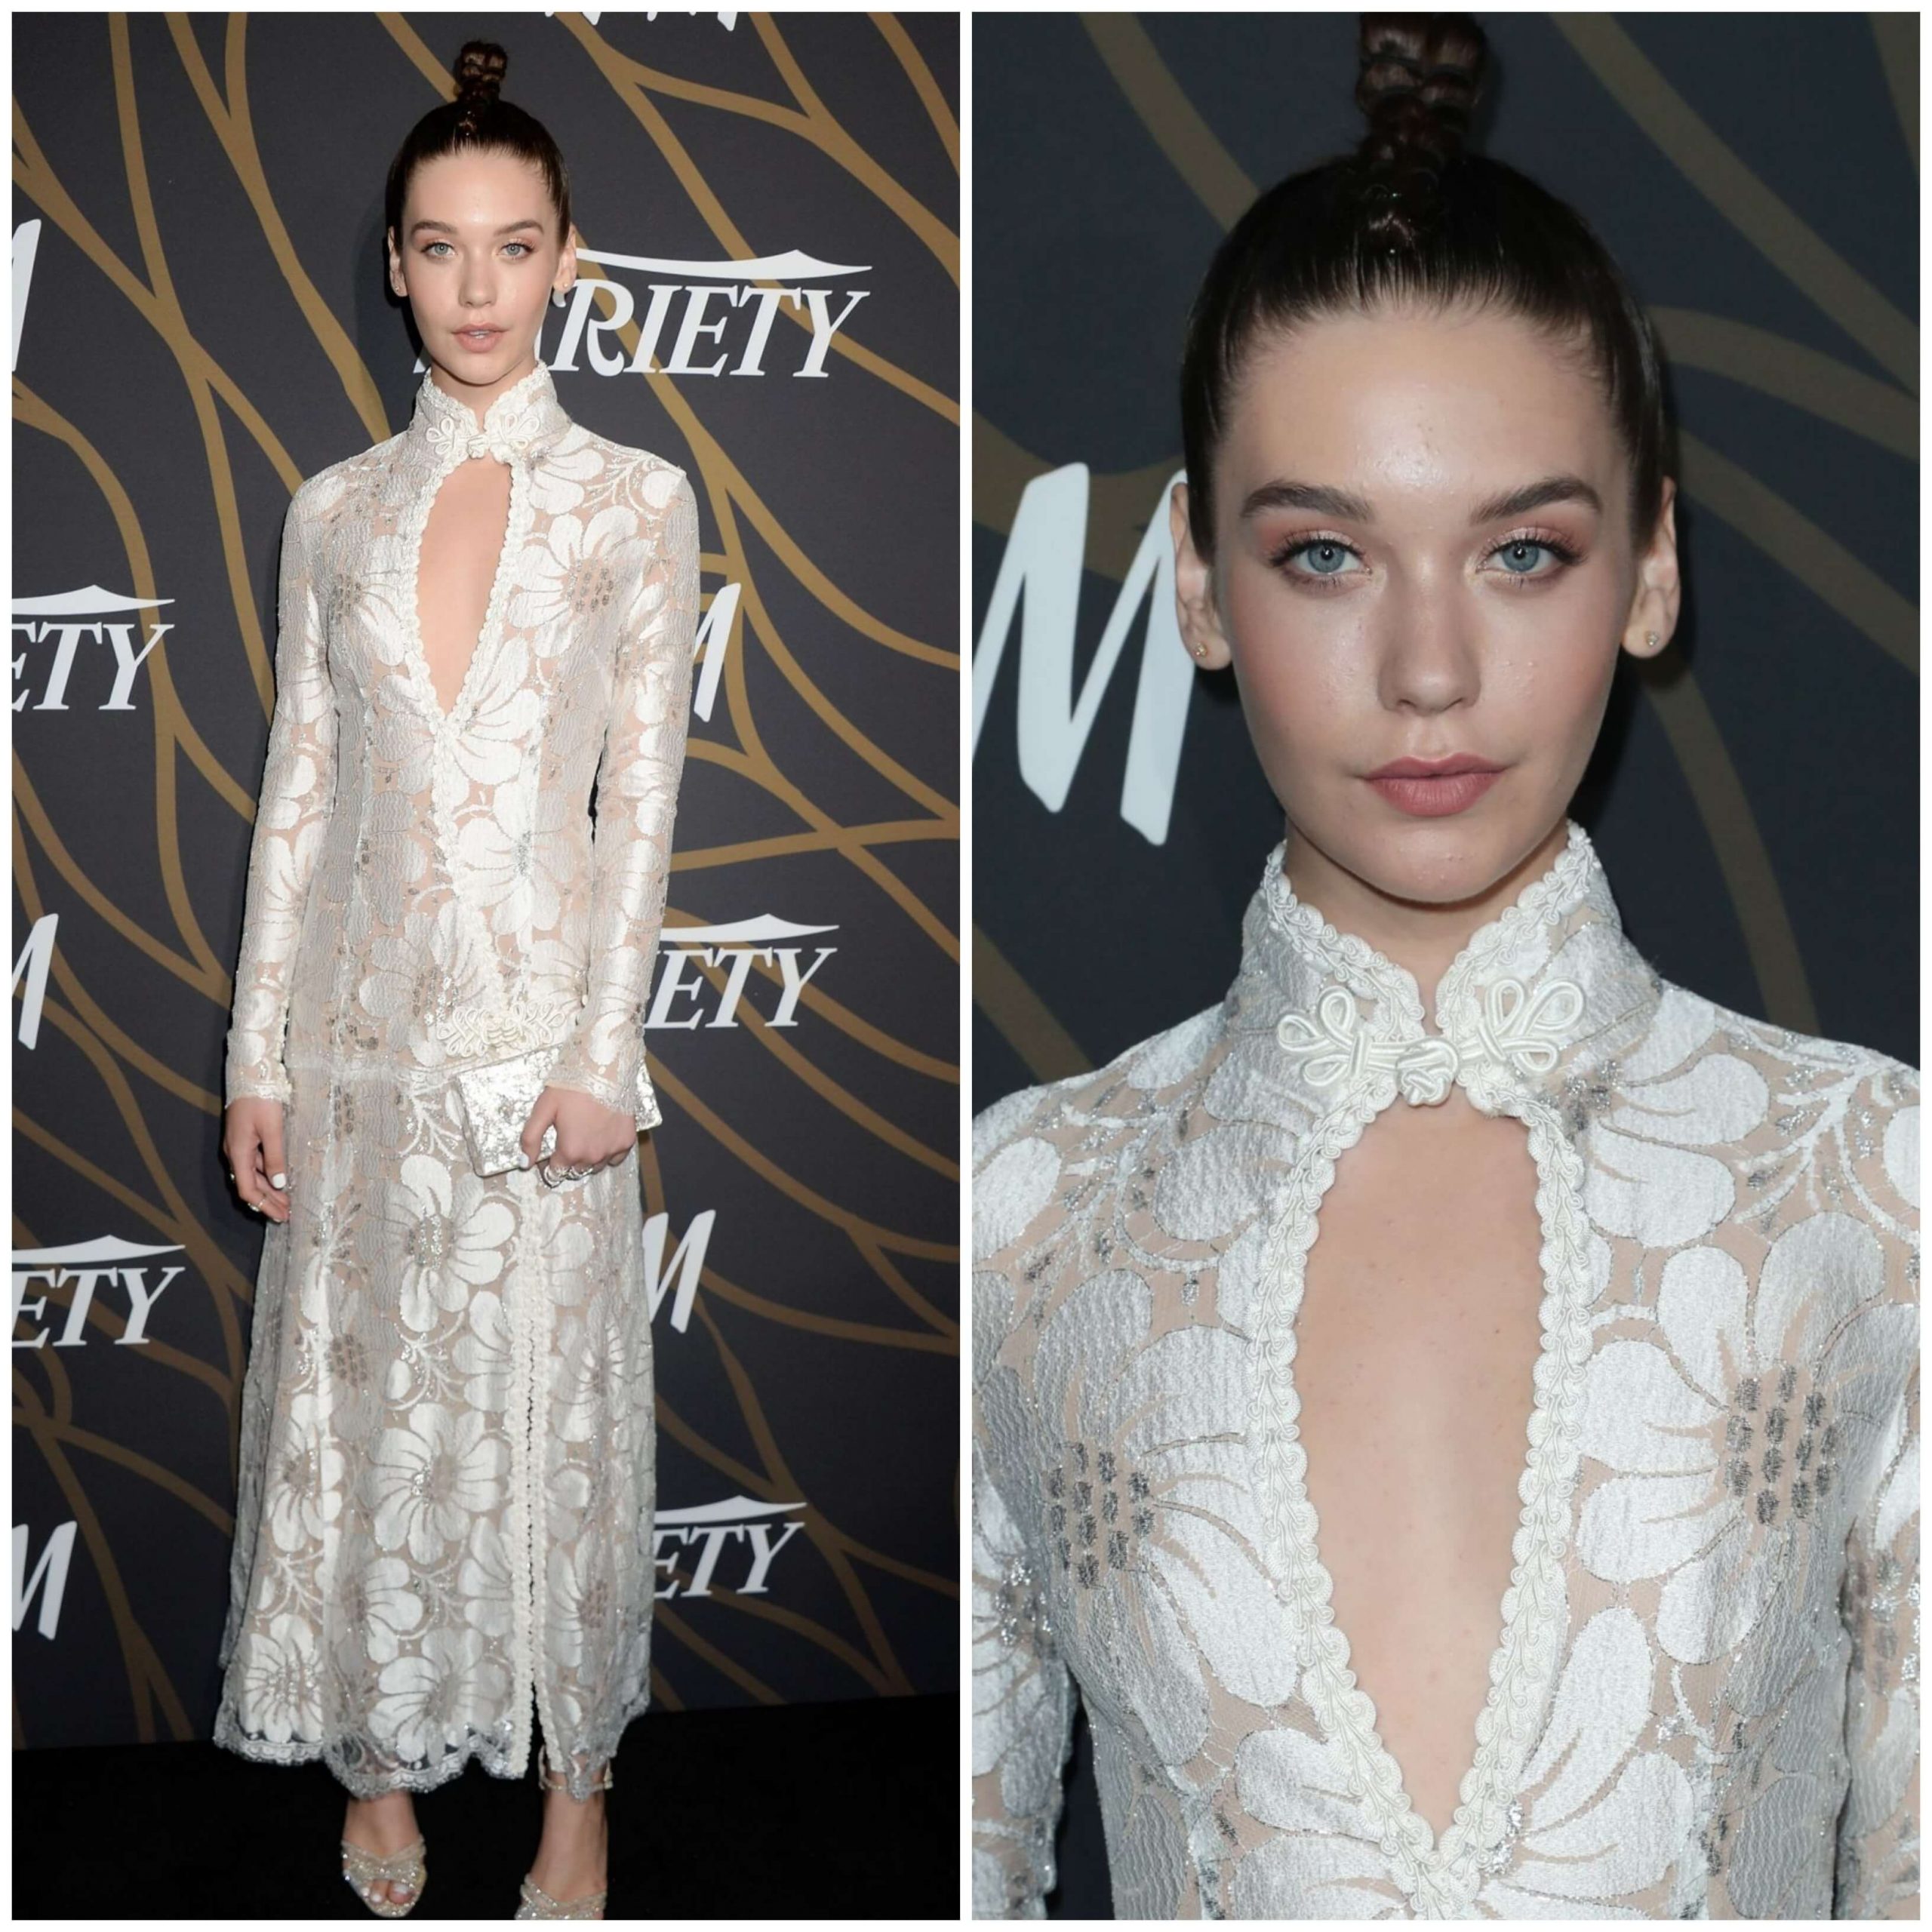 Amanda Steele  In White Floral Pattern Lace Design Halter Neck Long Dress At  Variety Power of Young Hollywood in LA